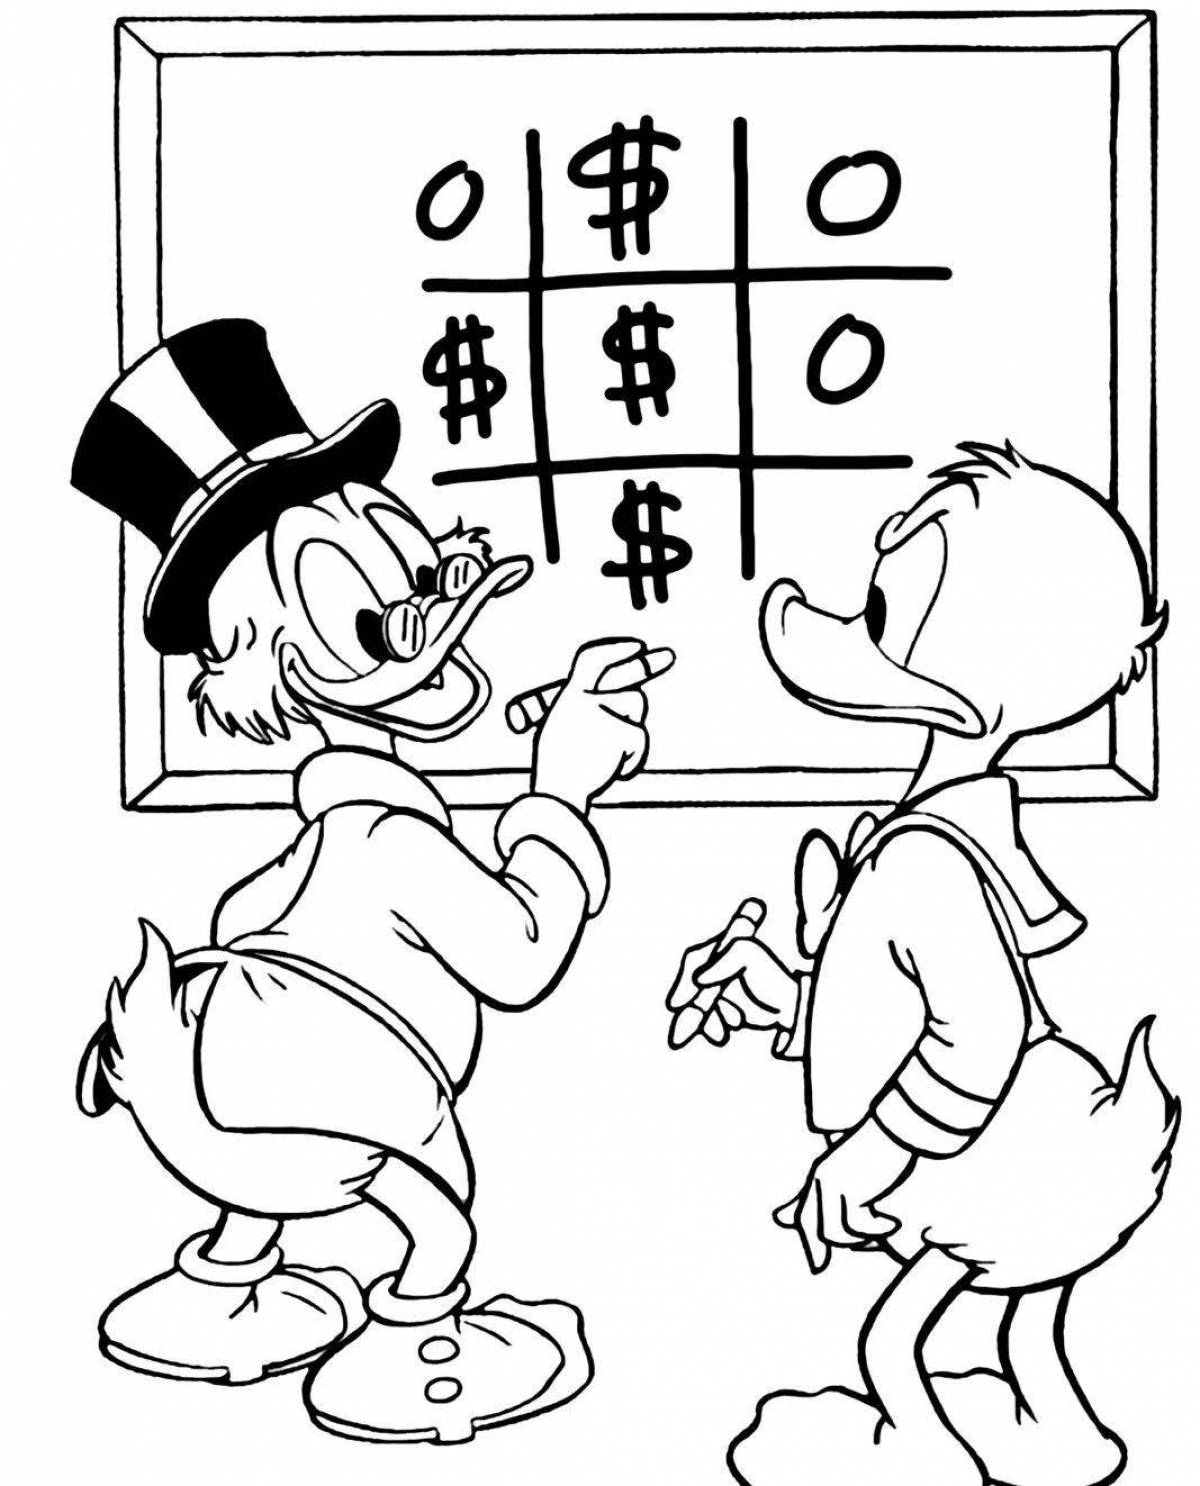 Funny donald duck with money